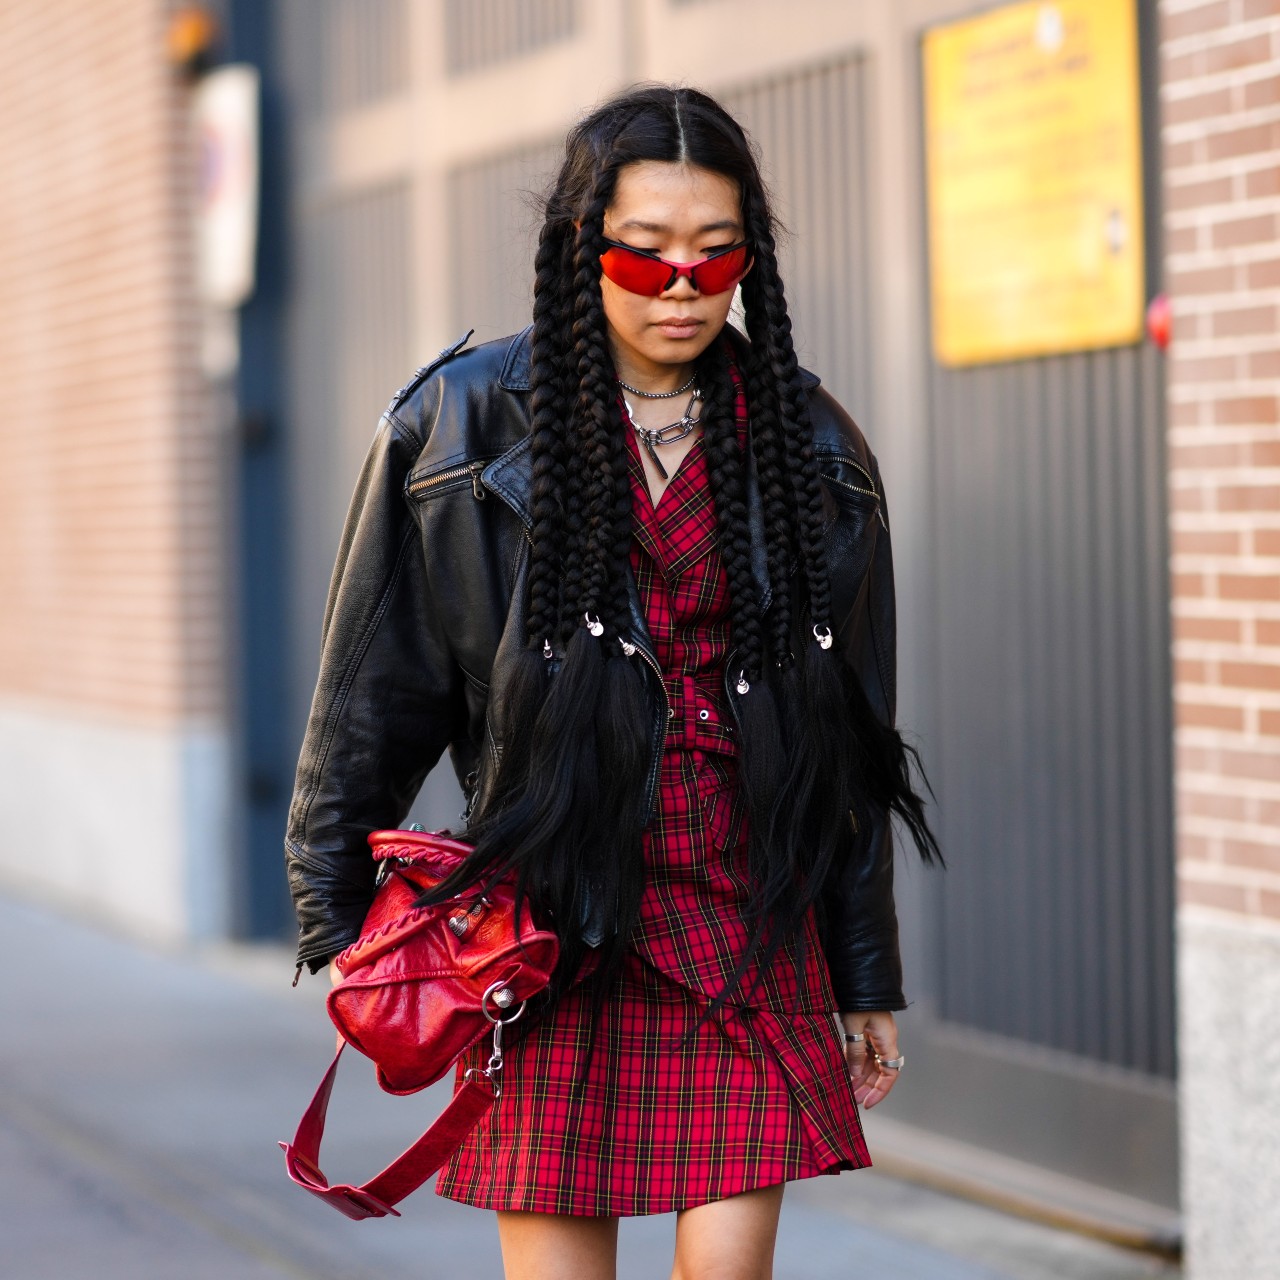 Grunge Aesthetic: Types, Styles, Tips And 40 Outfit Ideas FAVERIE ...